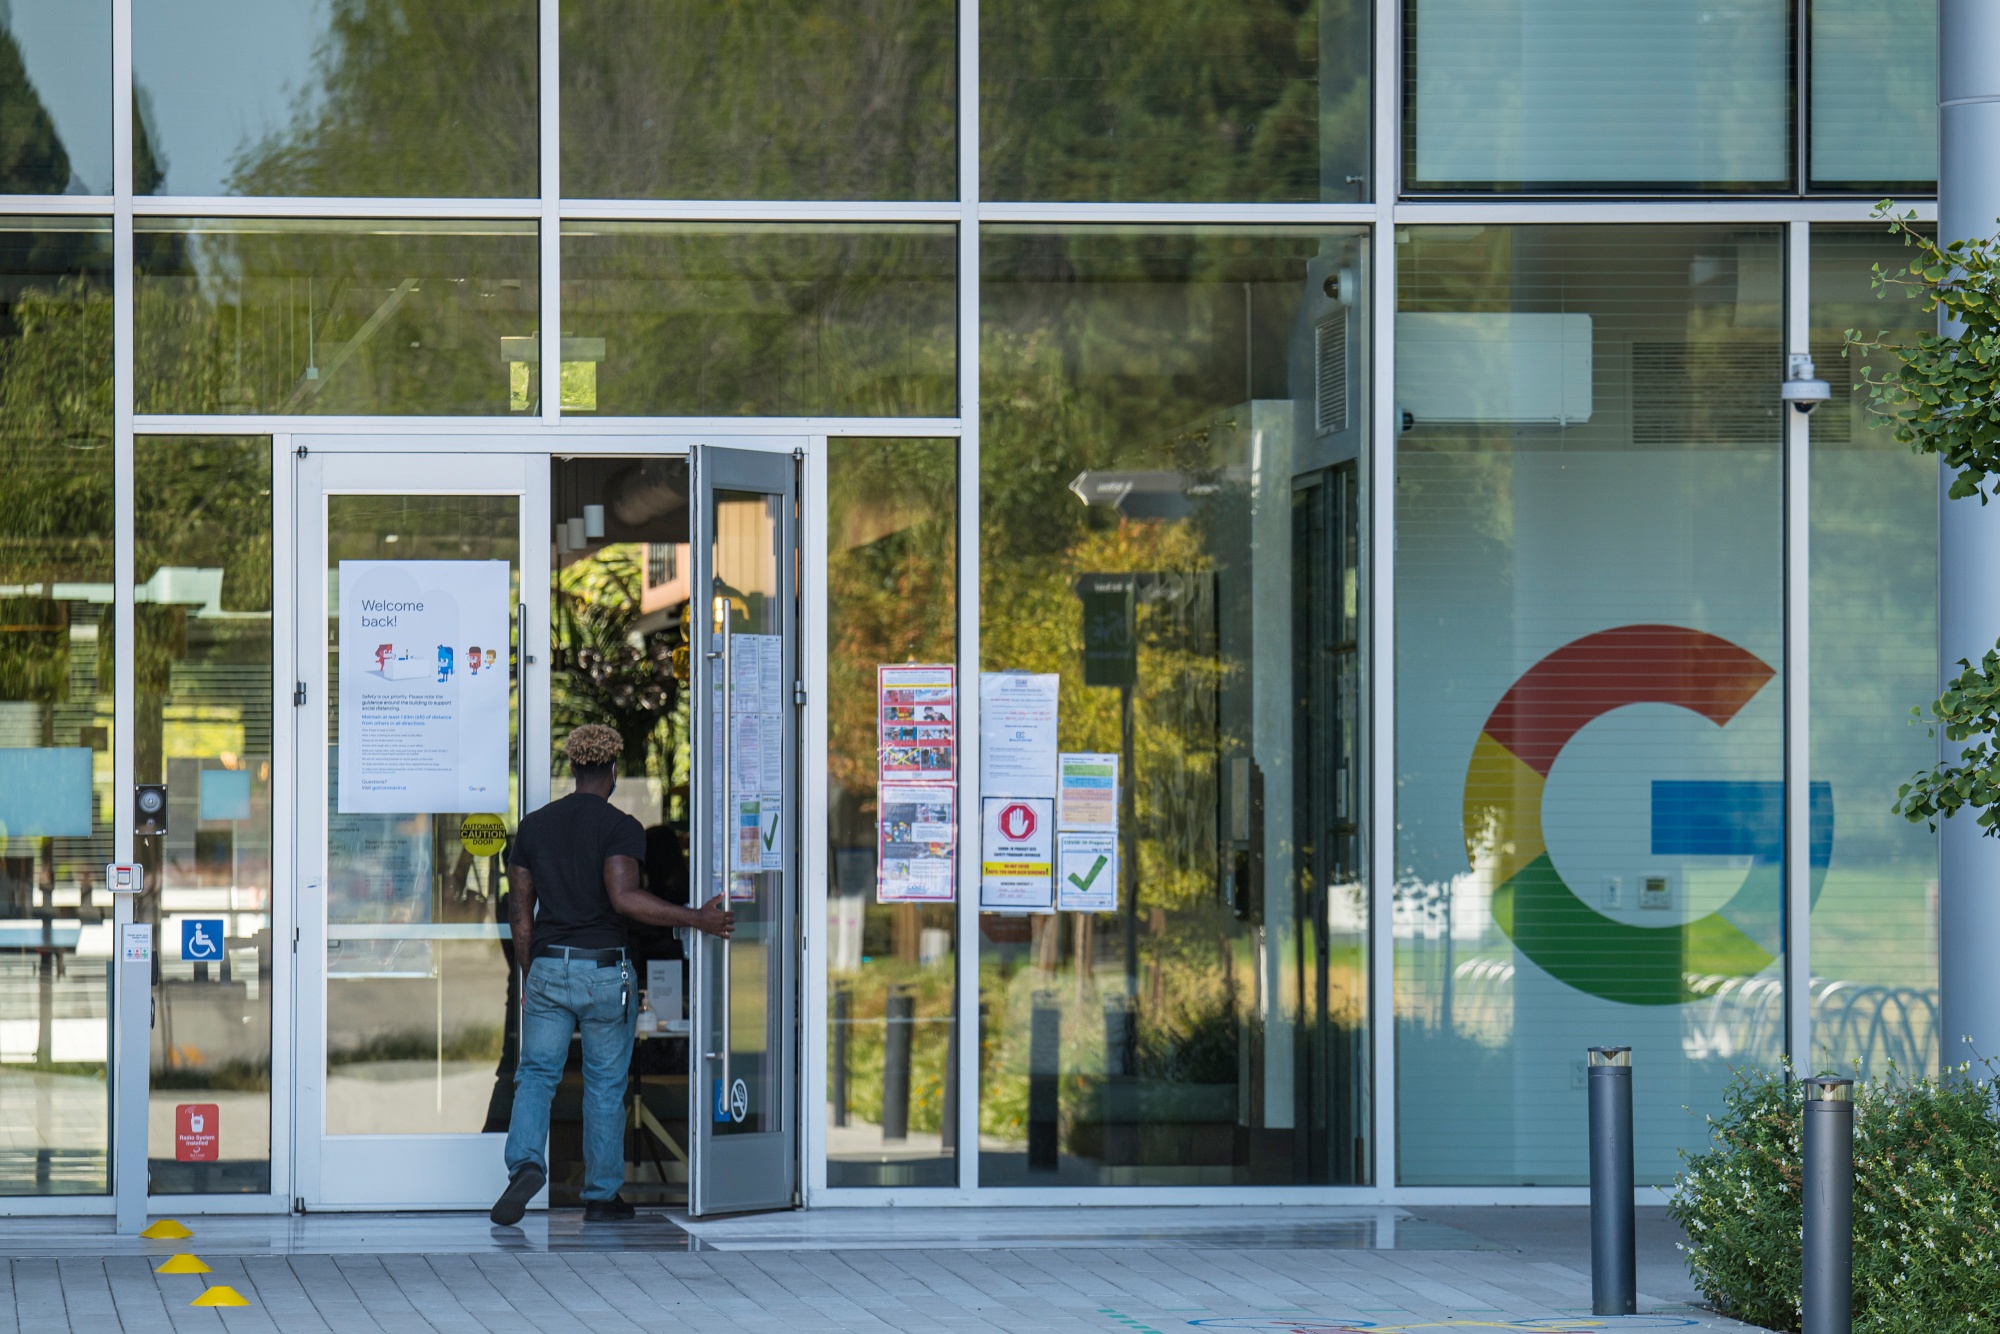 Google’s campus in Mountain View, California.